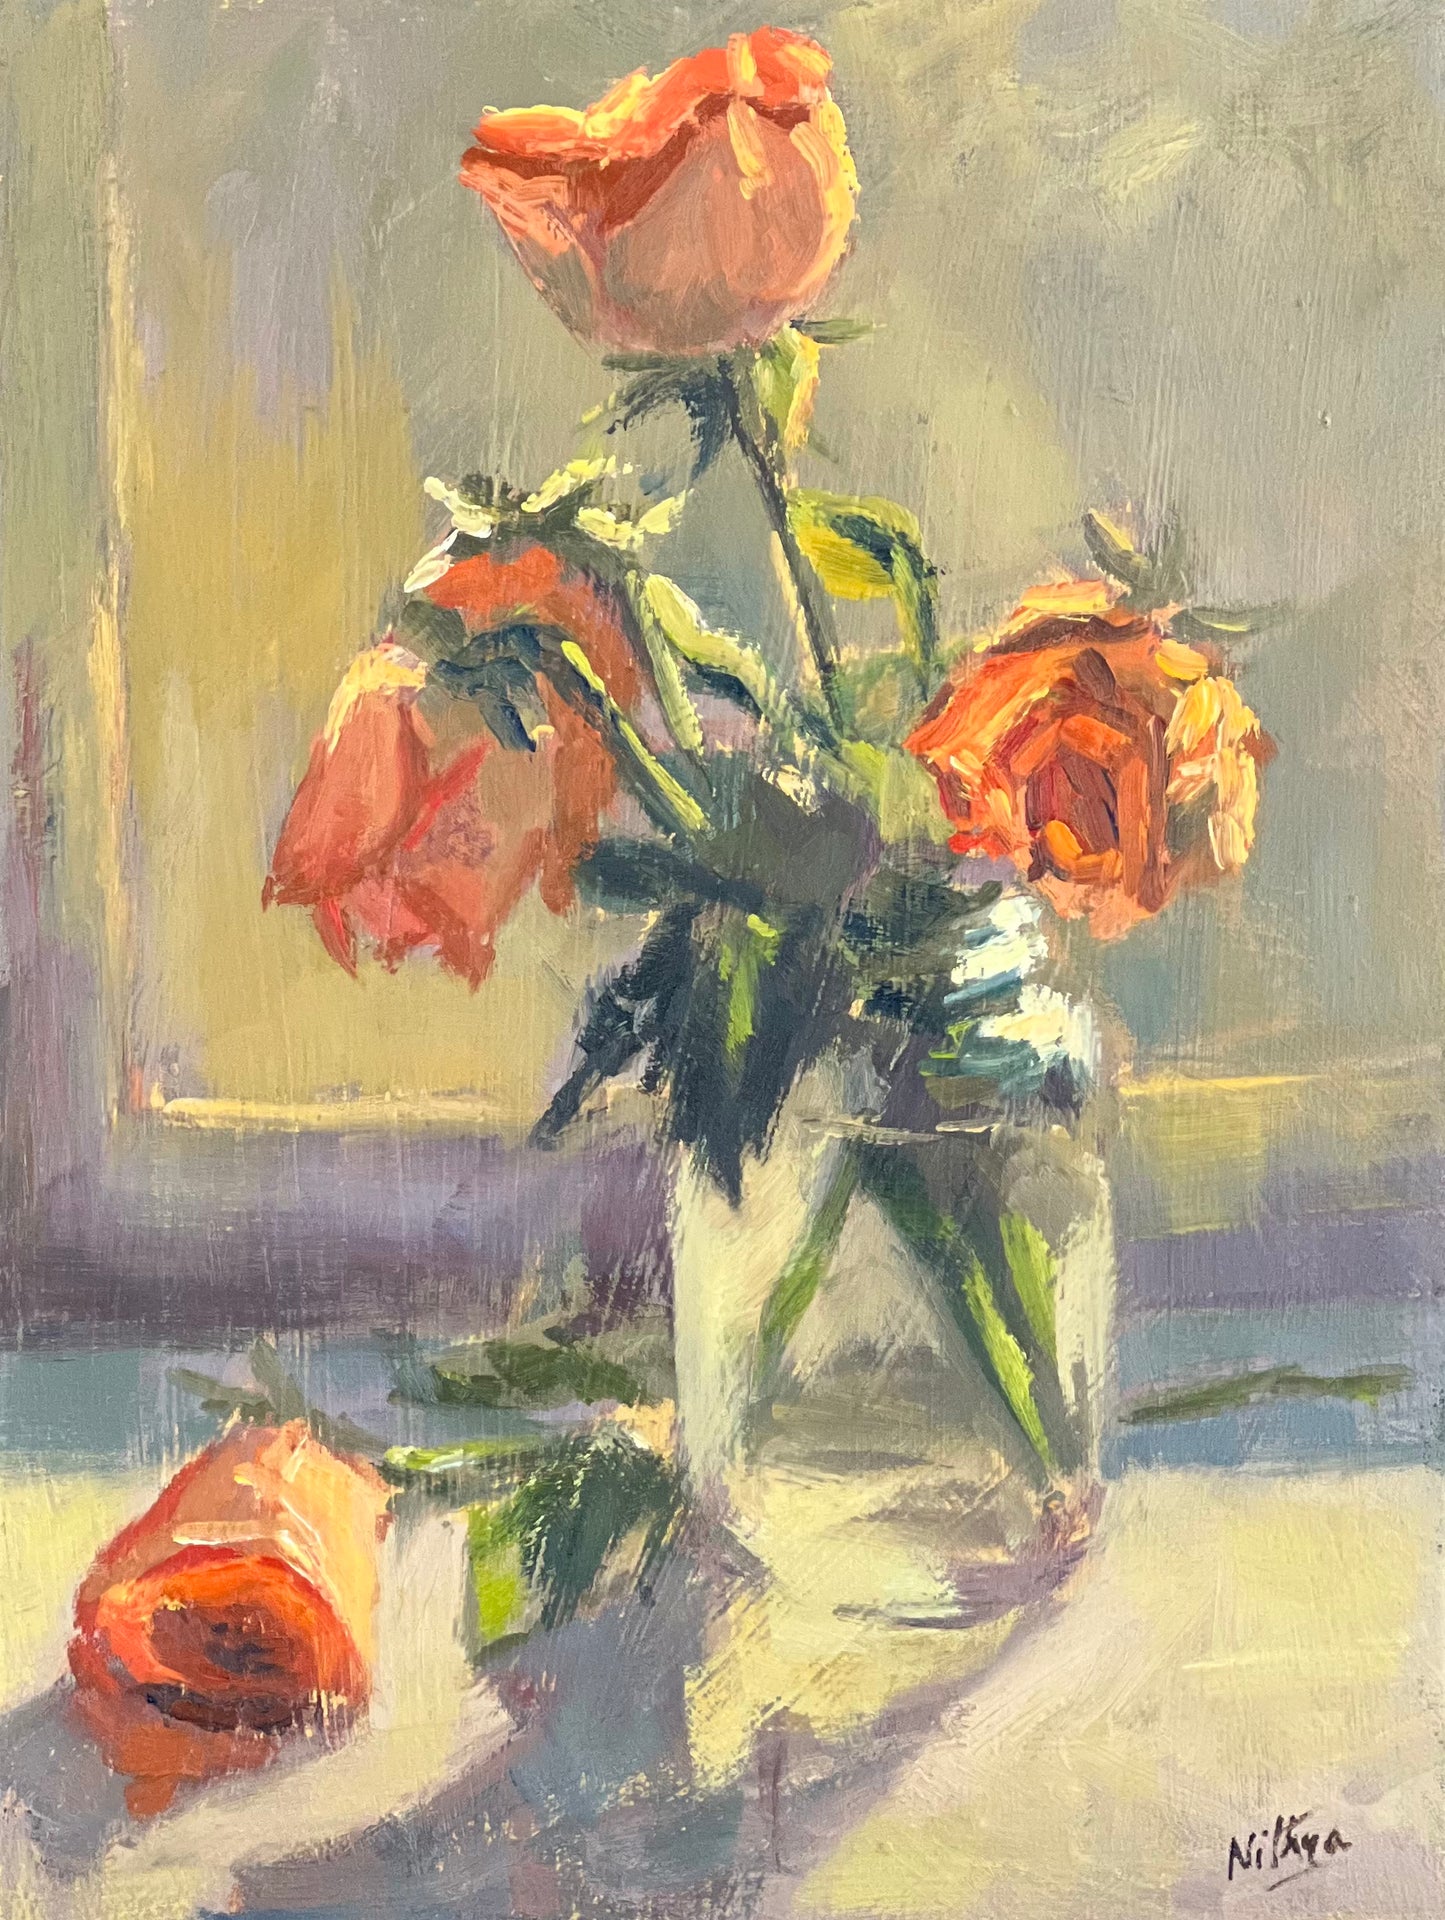 Oil Painting of Roses - Orange roses in the evening sun